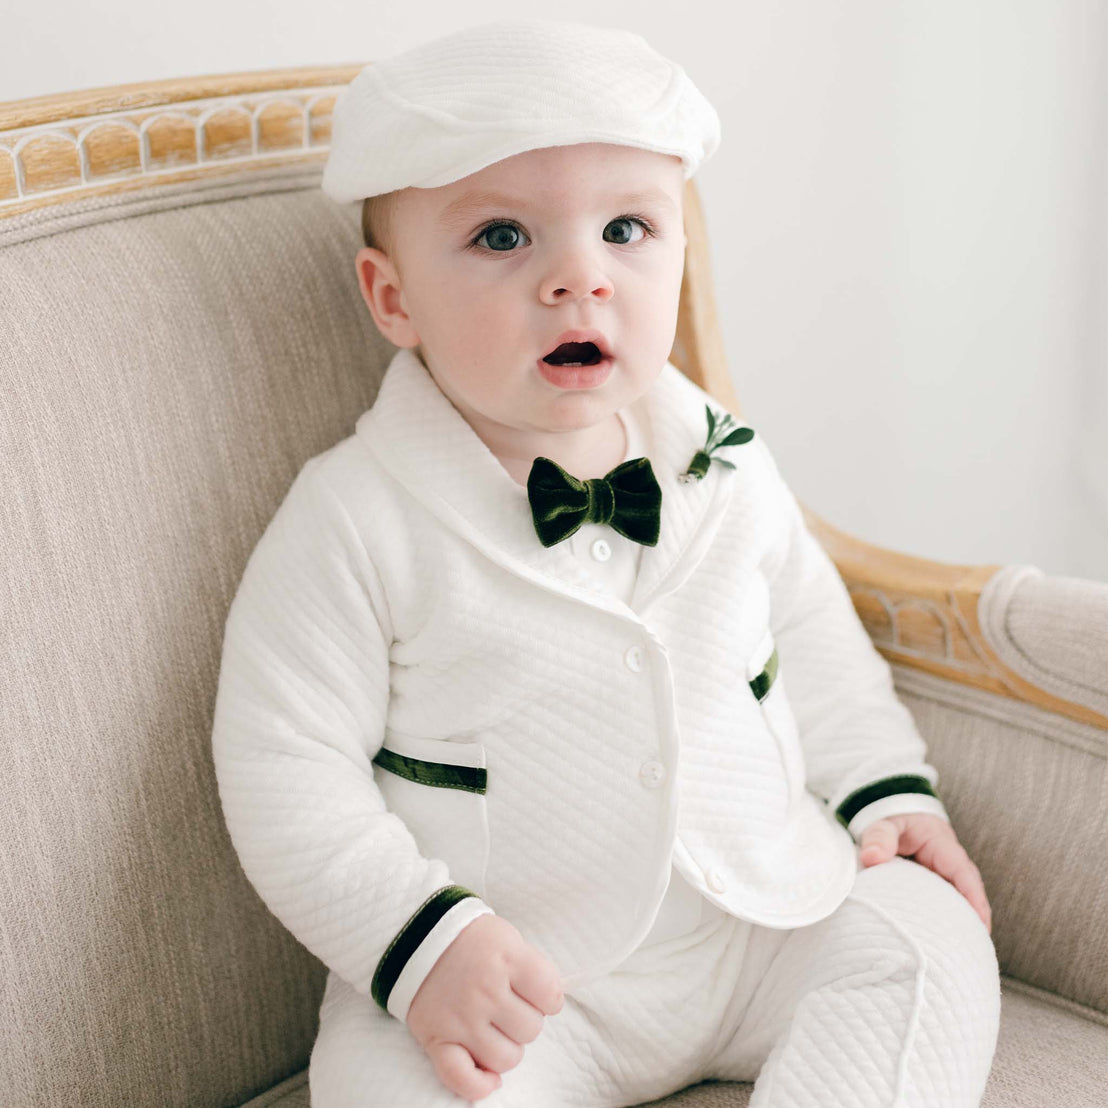 A baby wearing a Noah 3-Piece Suit with Green Trim and a cap sits on an upscale beige sofa, looking surprised with wide eyes.